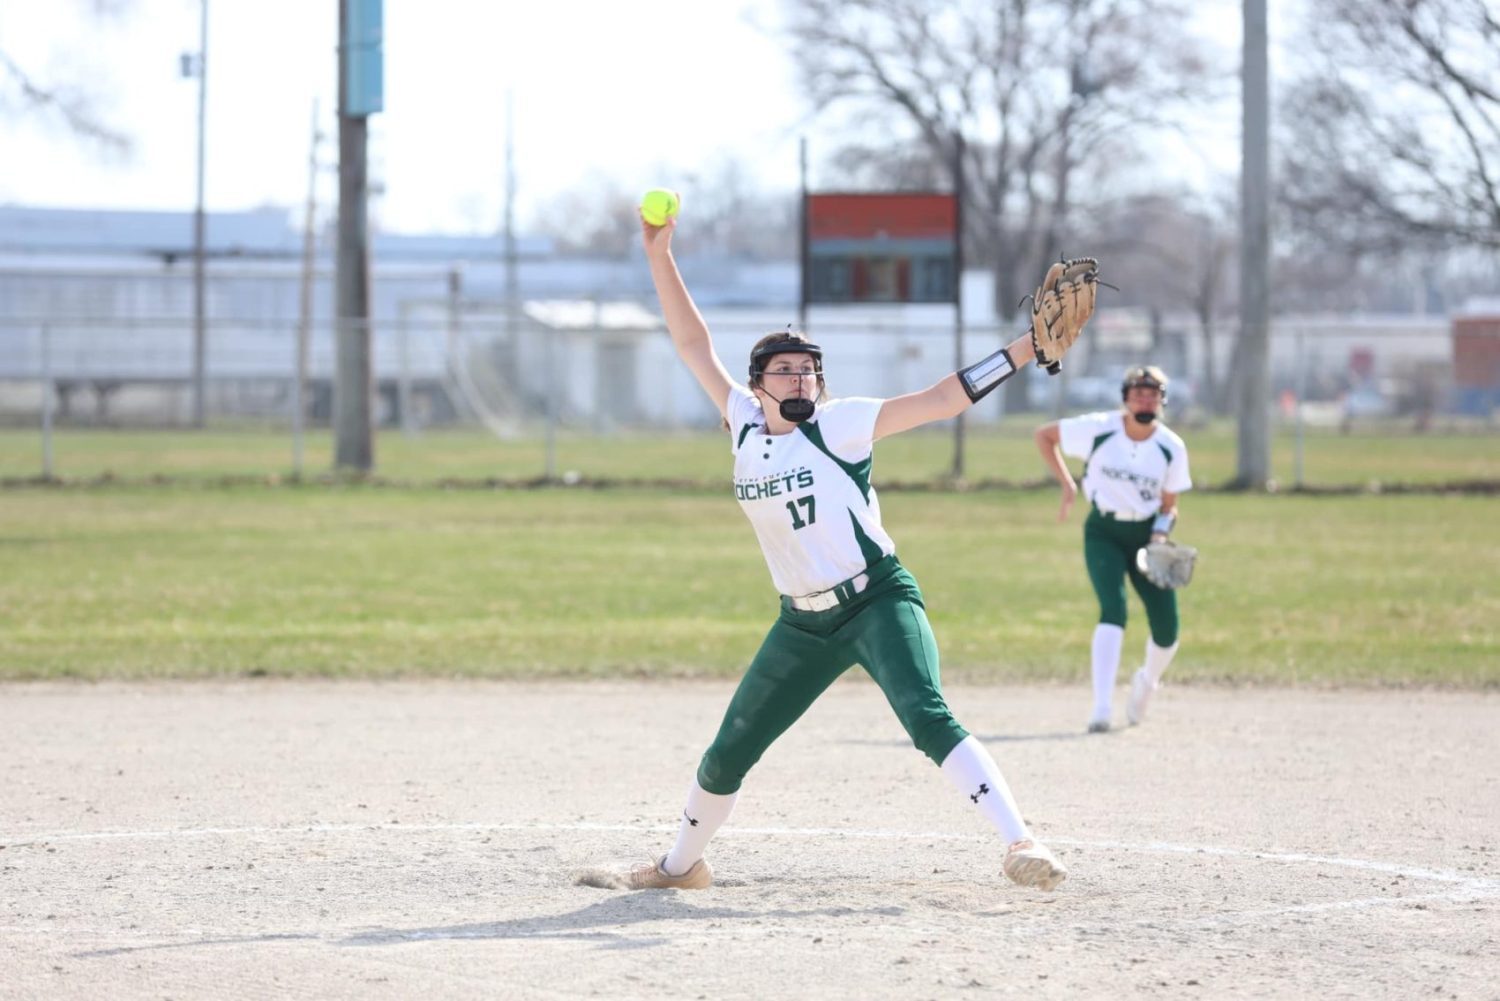 Reeths-Puffer dominates Muskegon in softball doubleheader